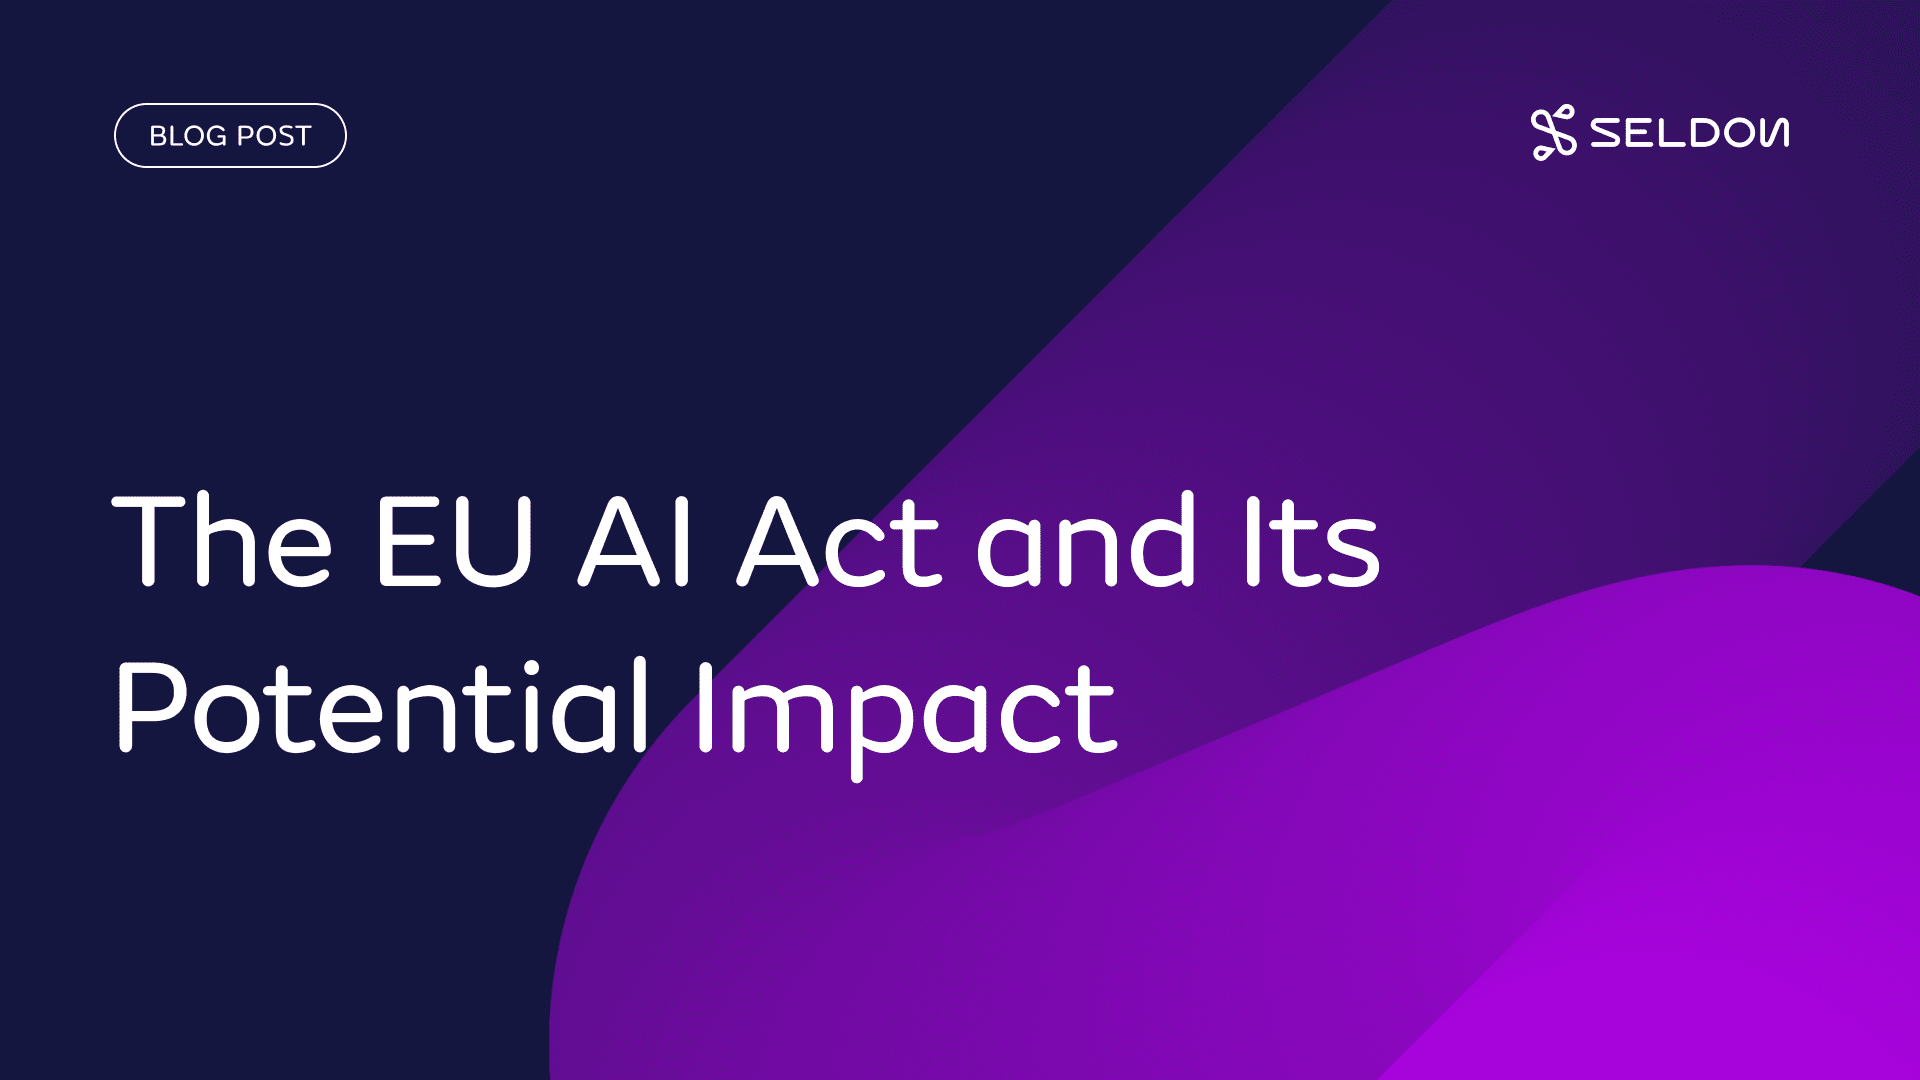 The EU AI Act and its Potential Impact on Enterprises Harnessing the Power of AI